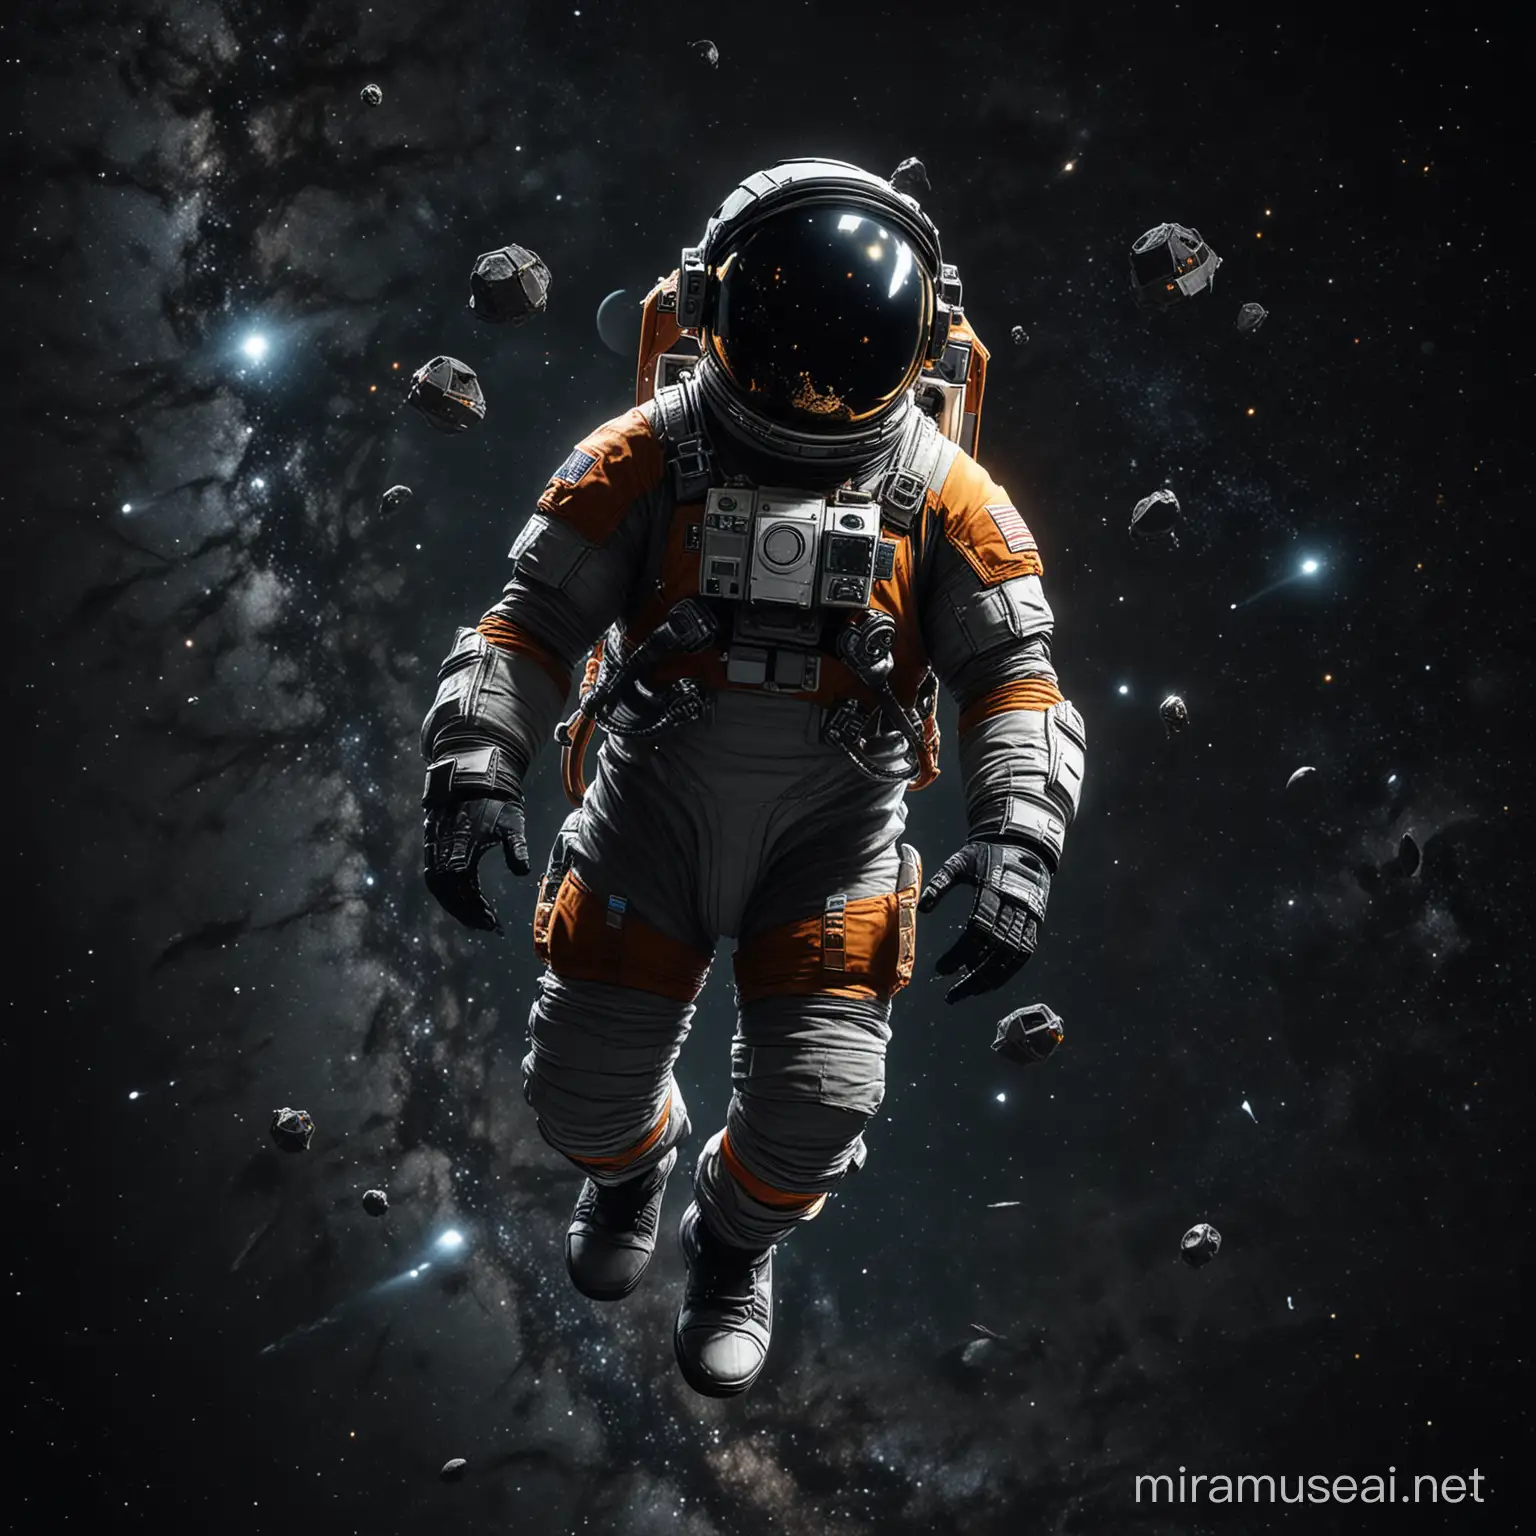 Astronaut, 1.5, wearing astronaut suit, Black background, floating in space view, look up to camera from down, Dark with work lights, Style of No Man's Sky game art 